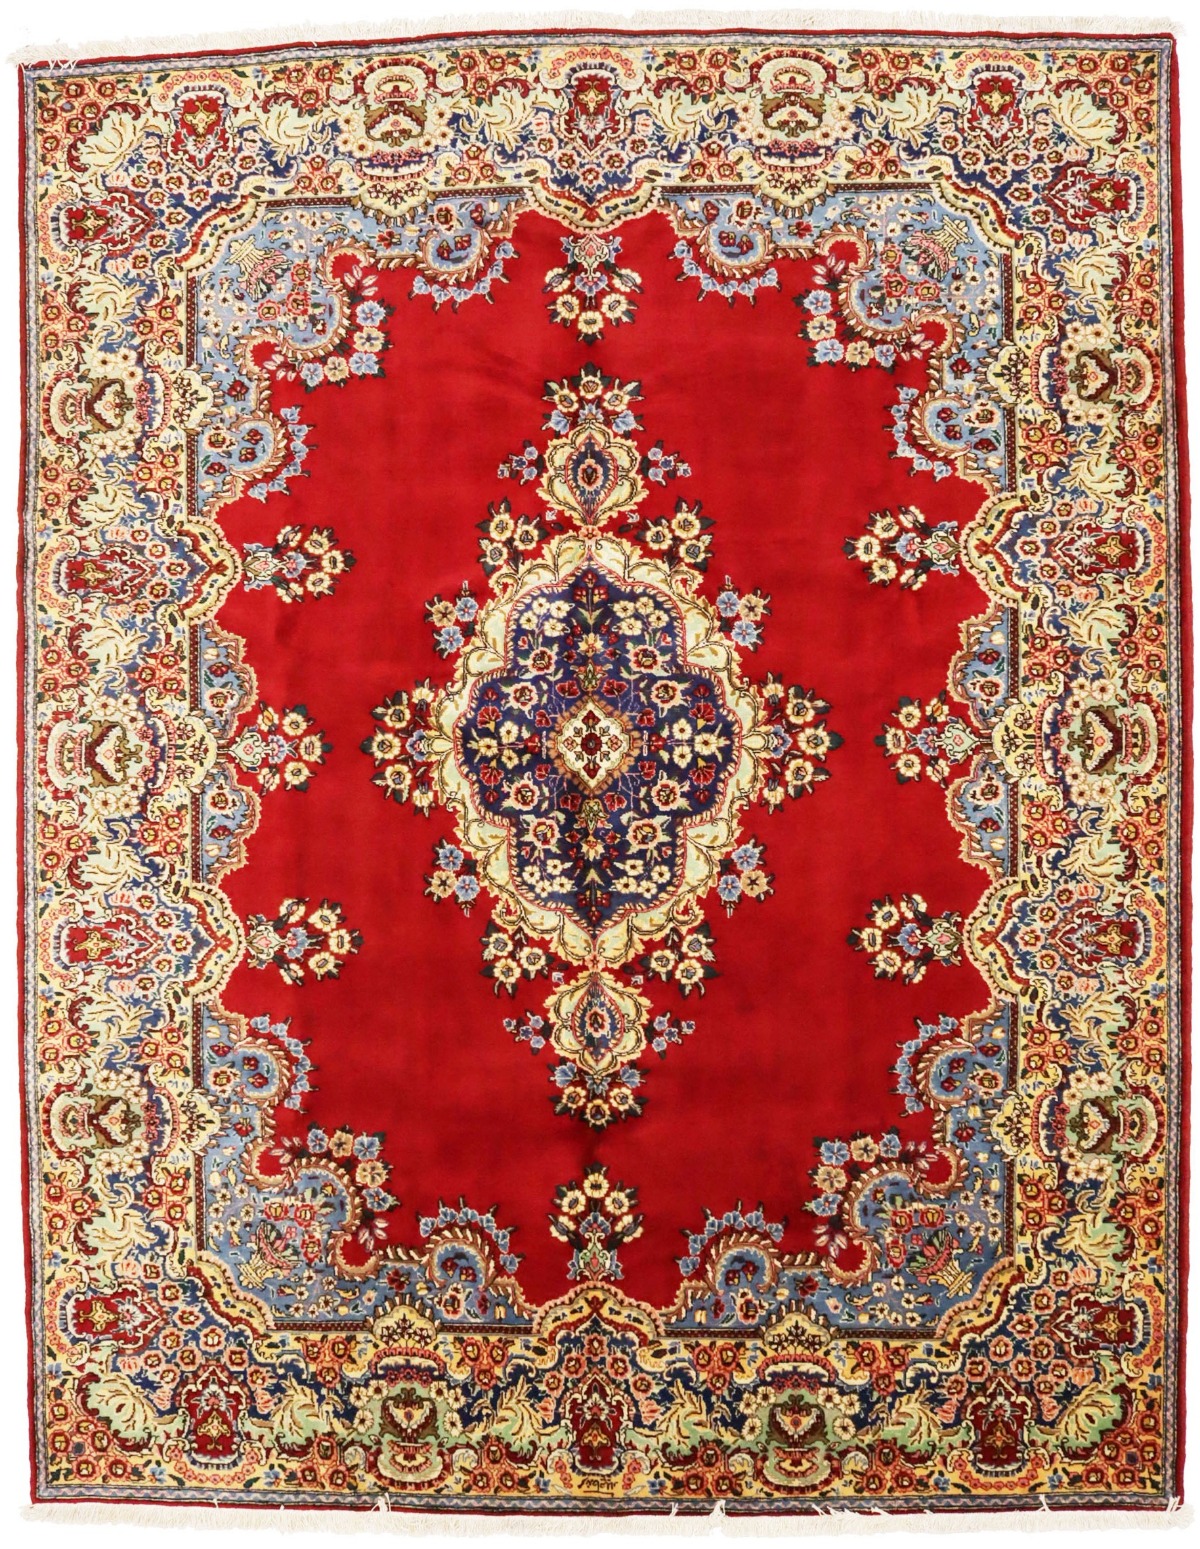 Vintage Floral Classic Red 10X13 Tabriz Persian Rug